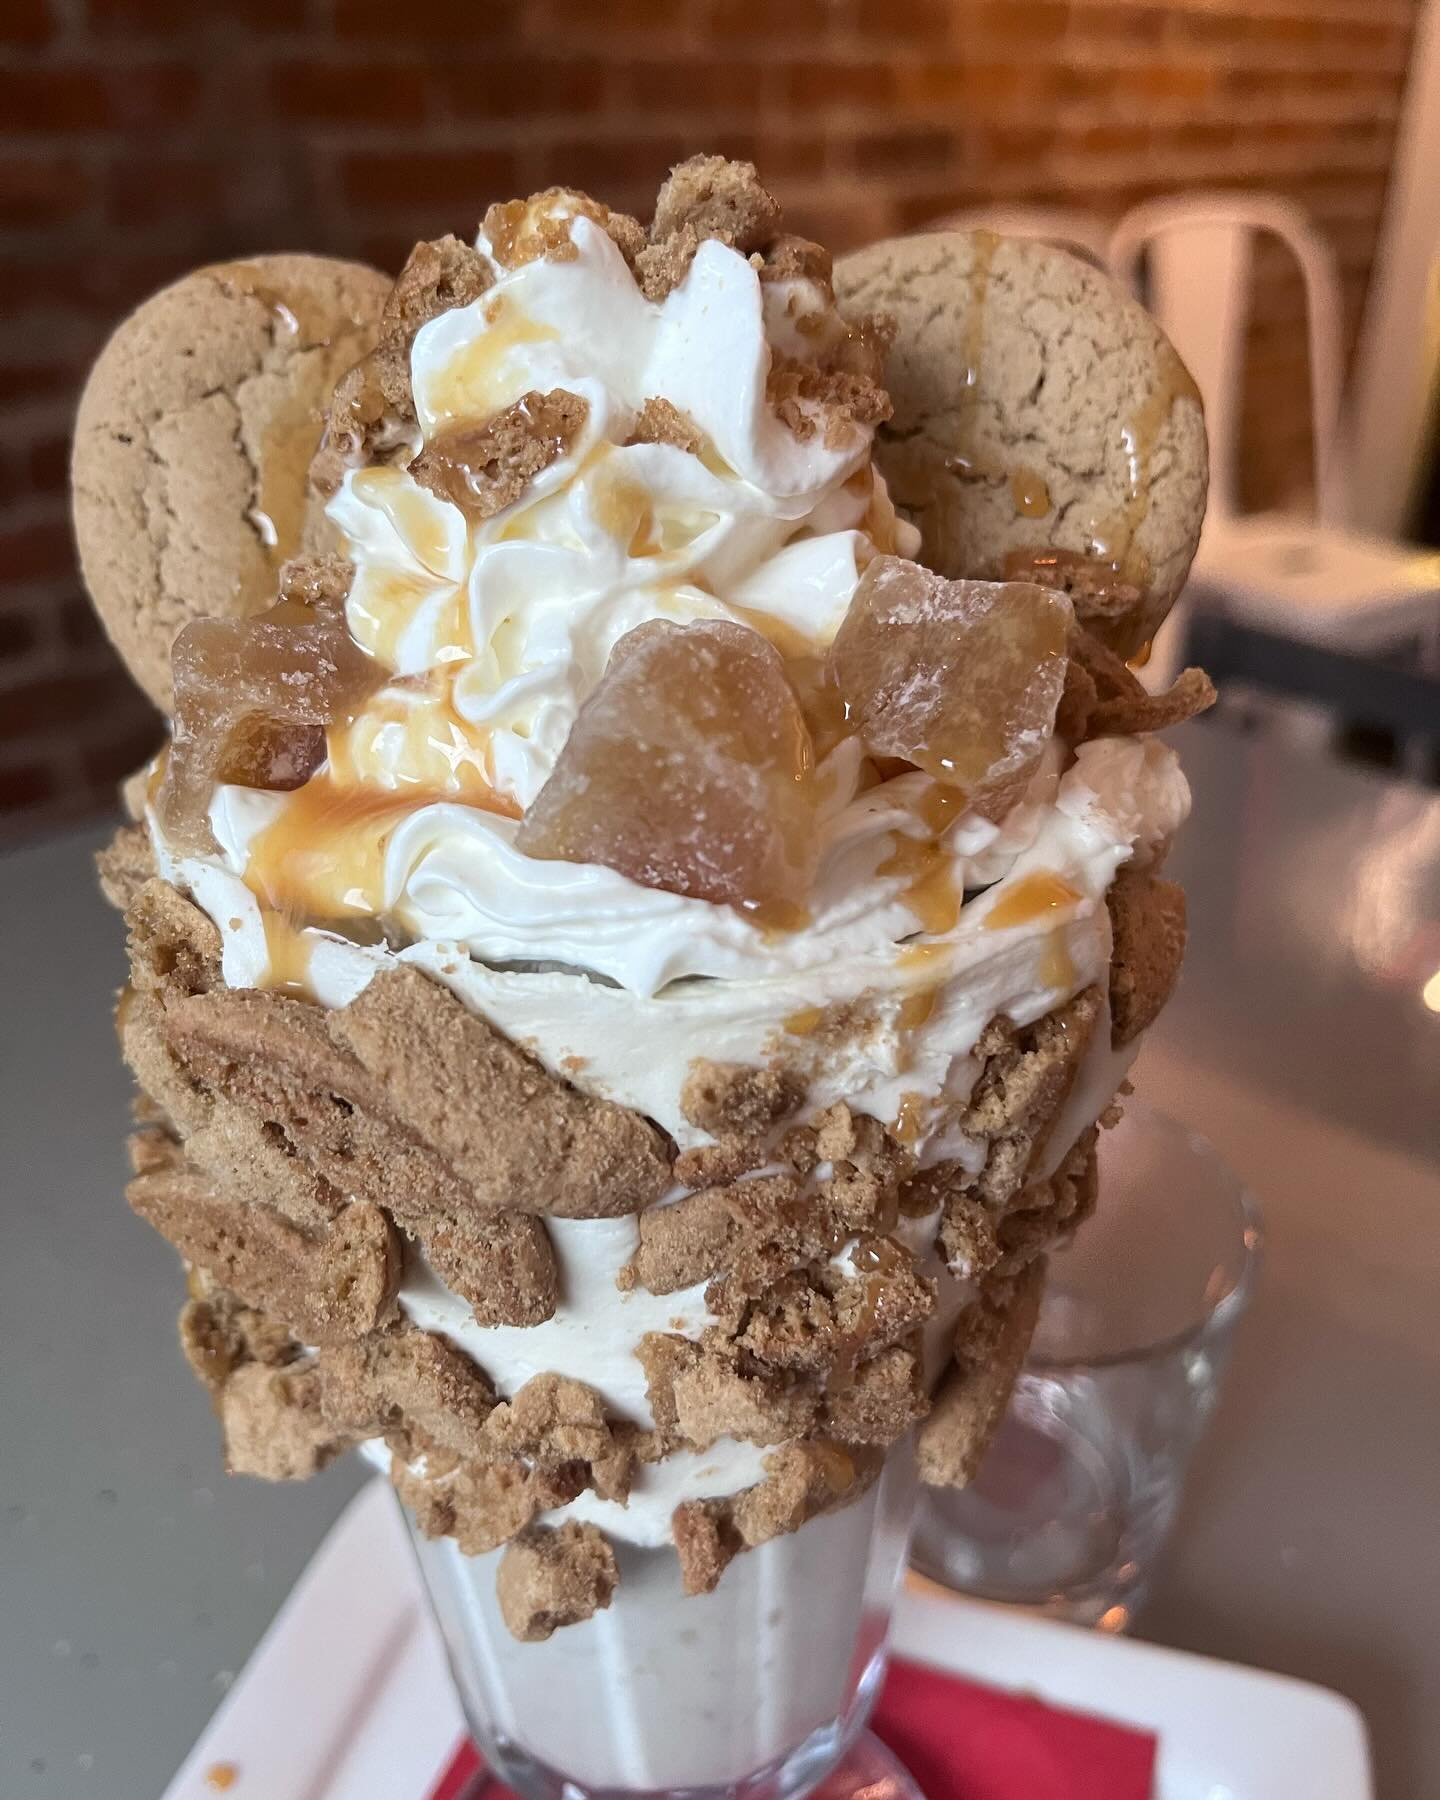 For you cult classic fans out there #haroldandmaude this Amazing Shake is for you! Ginger #amazingshake with ginger ice cream, ginger snaps and candied ginger.  As Maude said: &ldquo;Ginger Pie&hellip;Try something new each day.
After all, we&rsquo;r